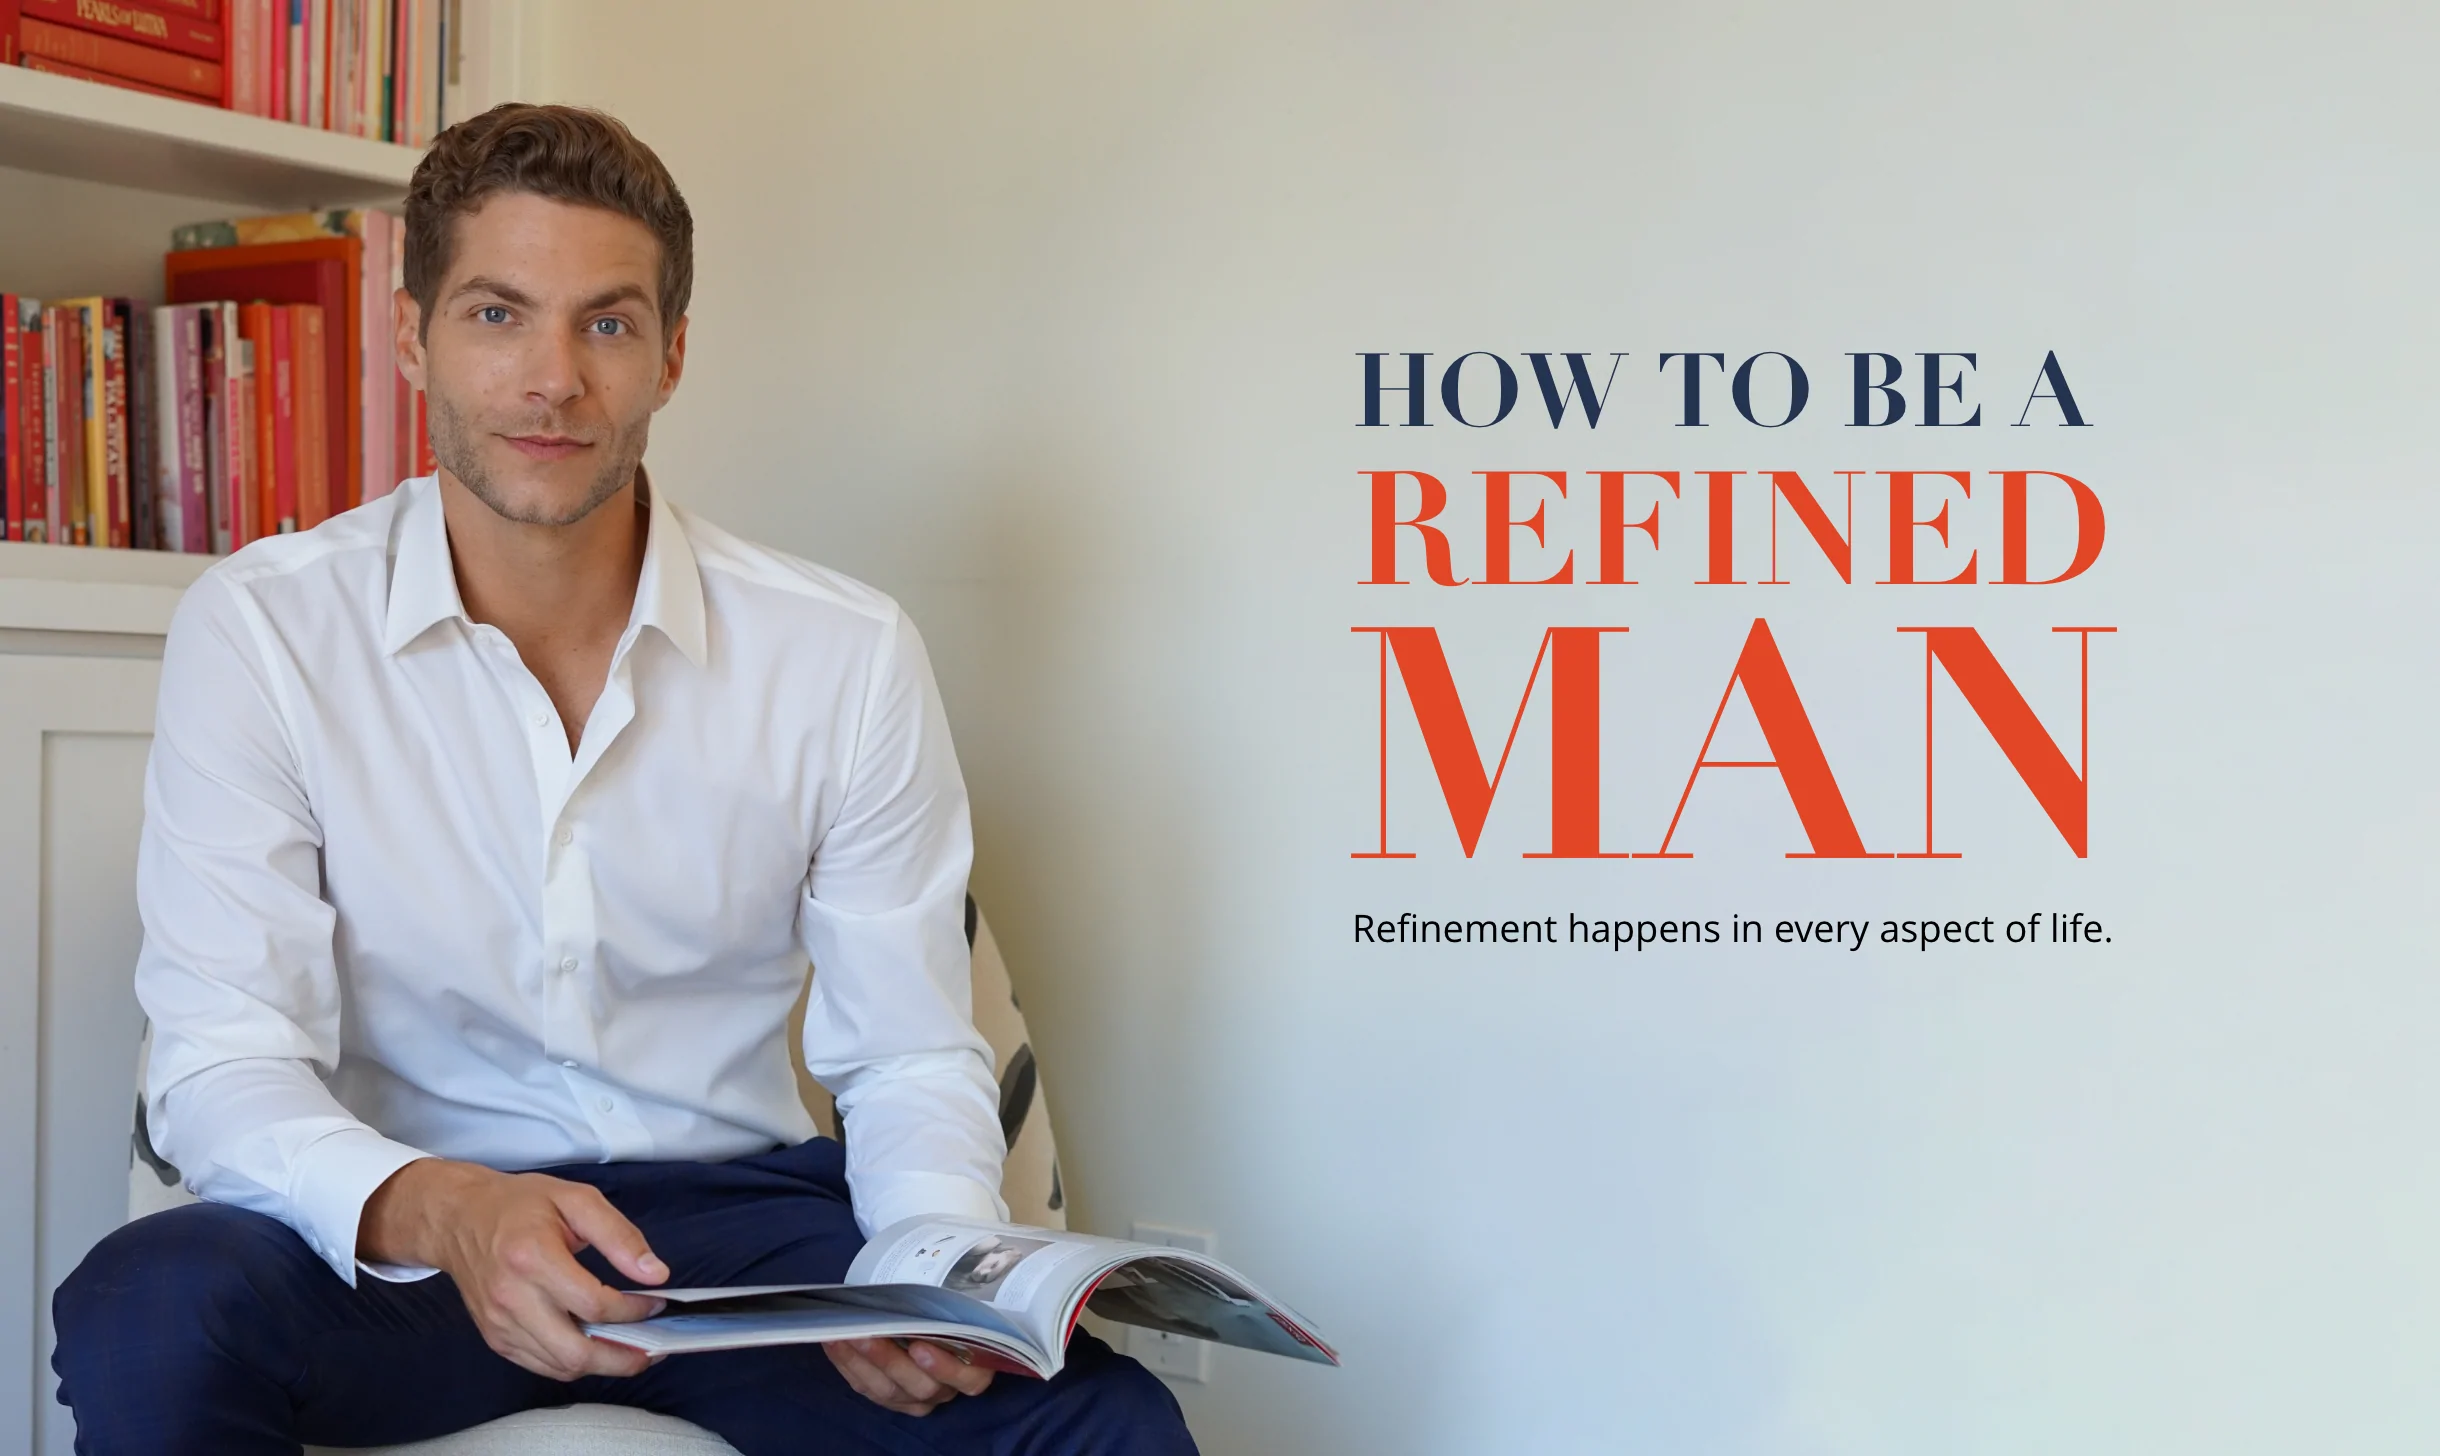 How to Be a Refined Man